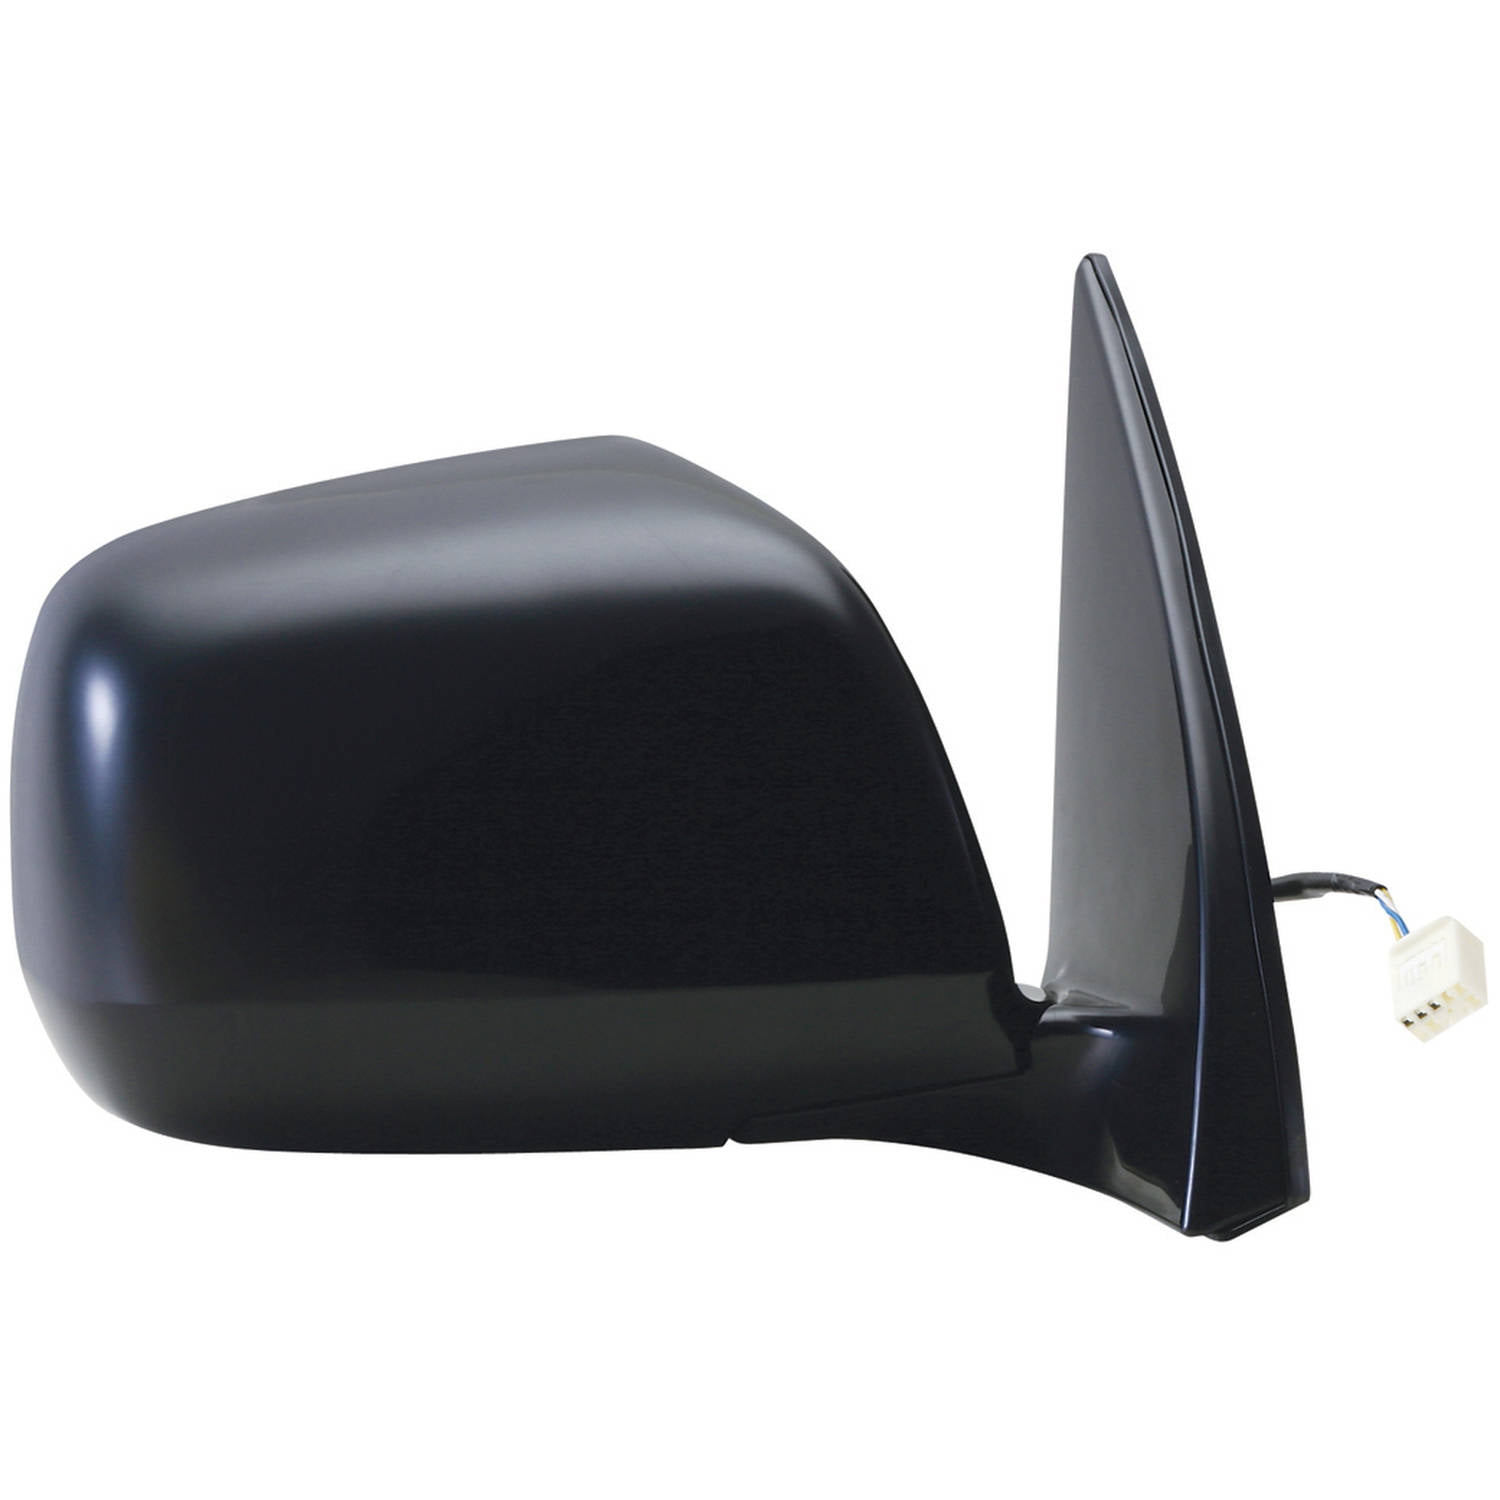 Gold Shrine for Honda Odyssey Power Heated Side Door Mirror 2005 2006 2007 2008 2009 2010 Driver Left Side Replacement 